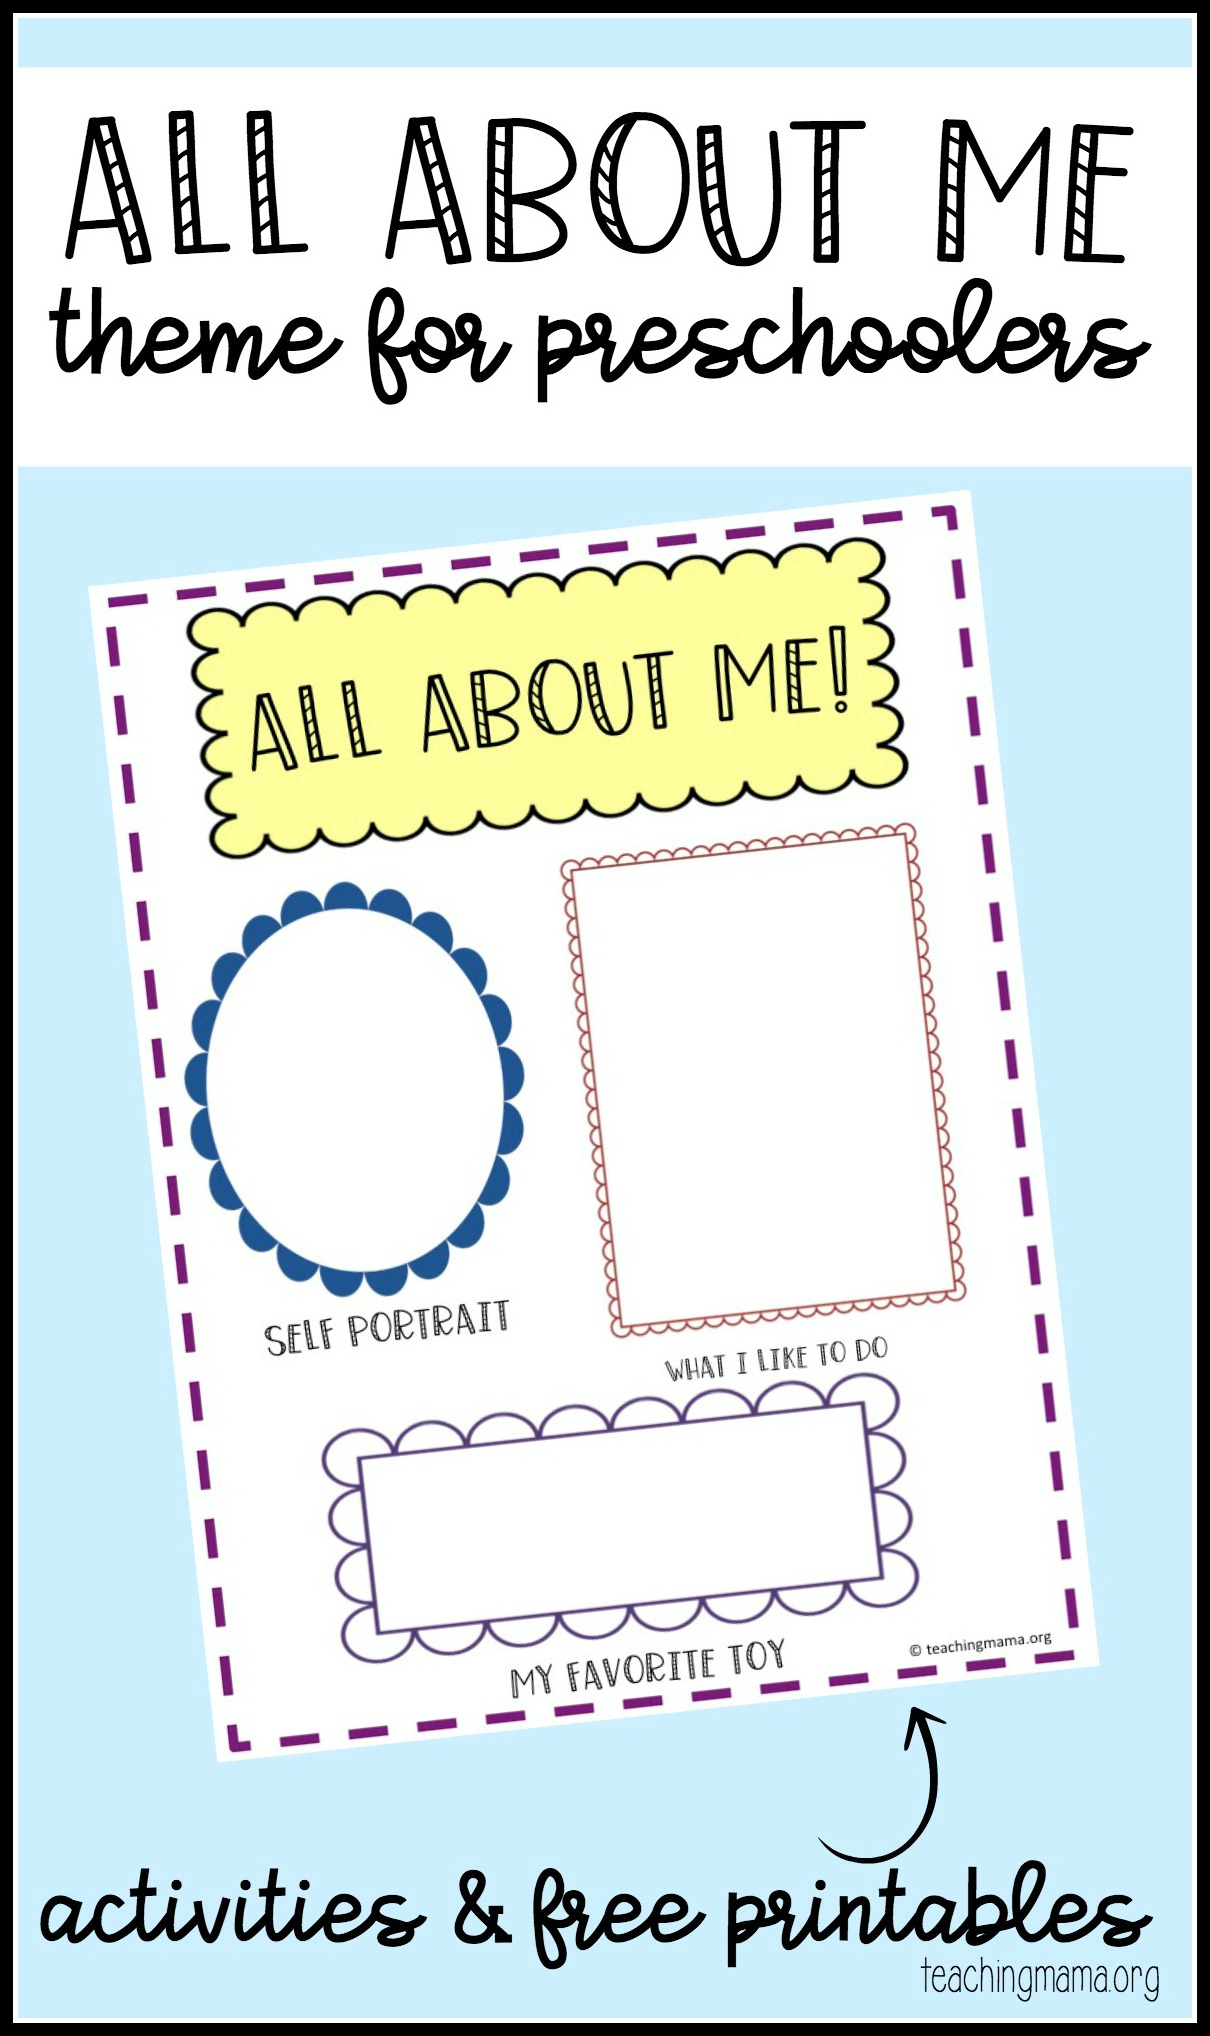 All About Me Preschool Theme - Free Printable Early Childhood Activities